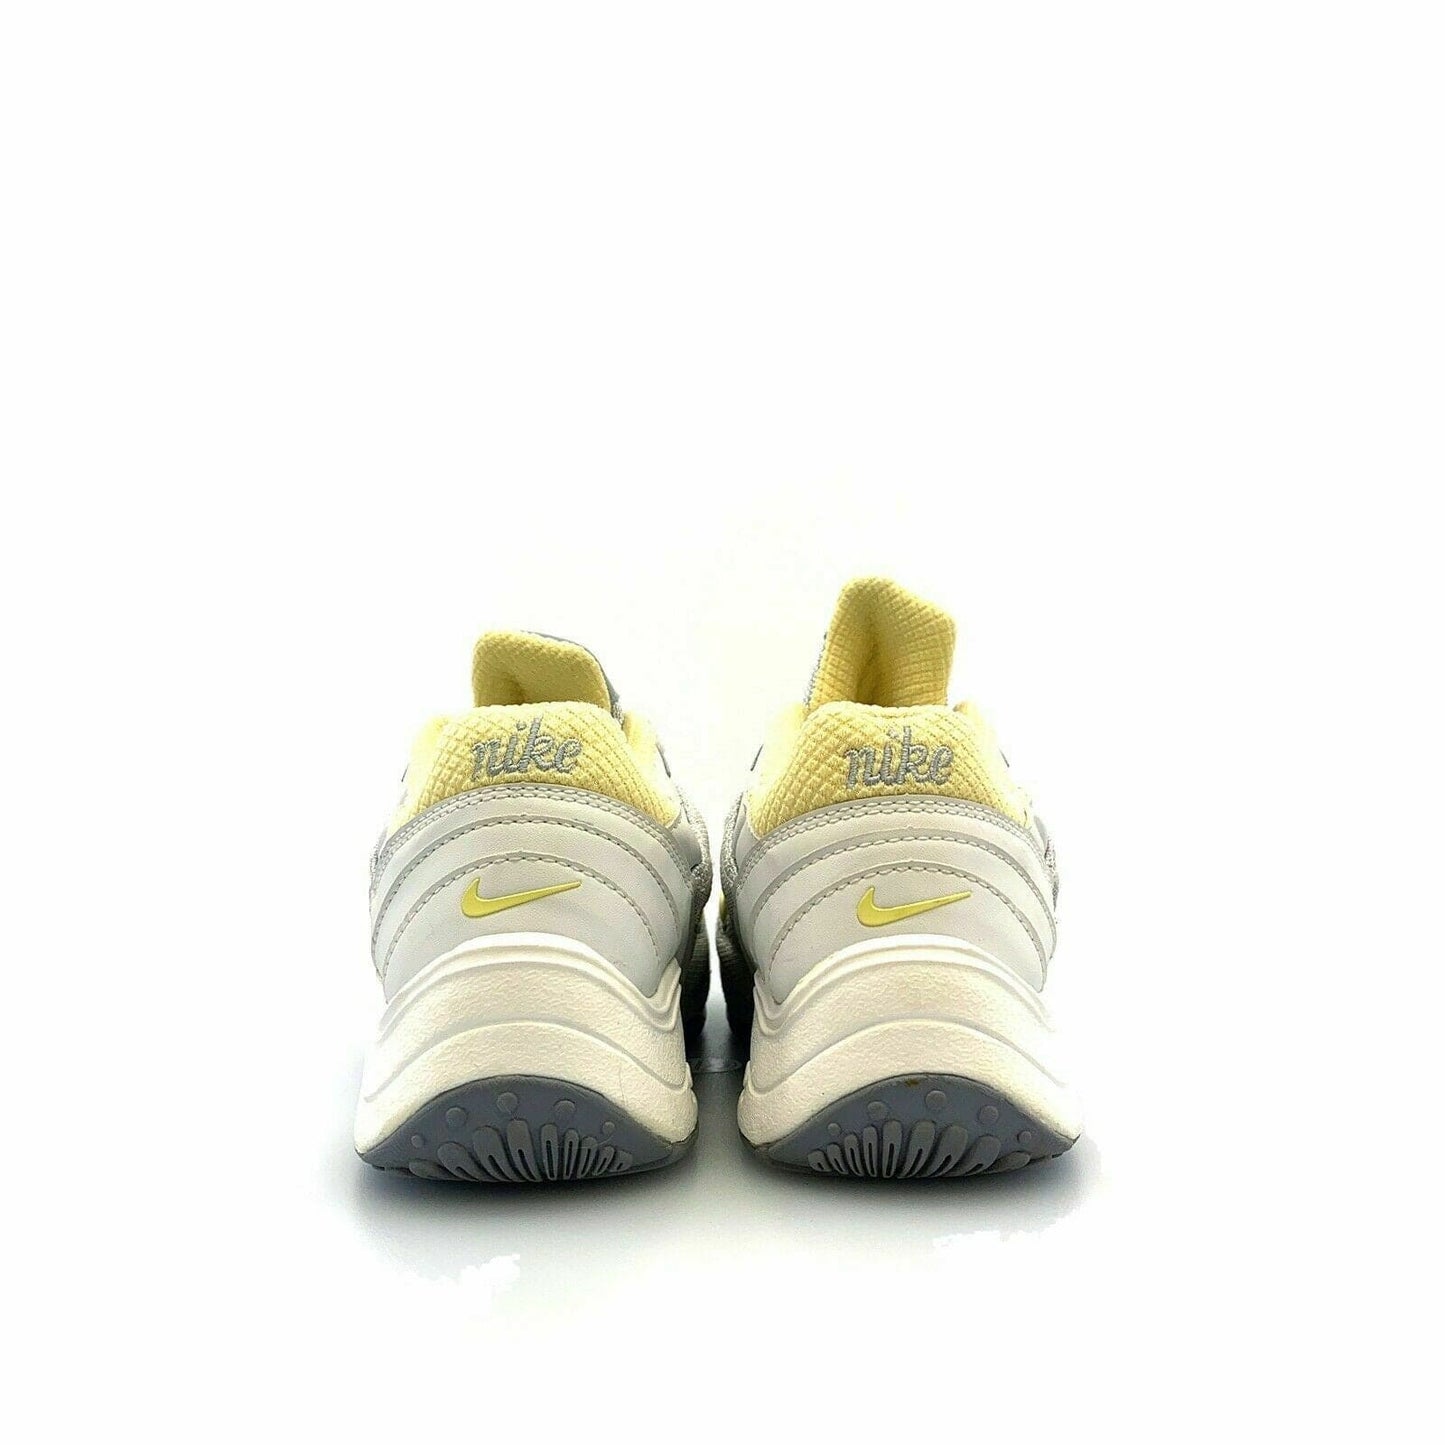 Captivating Nike Air Womens Size 6 Silver Yellow Training Athletic Shoes